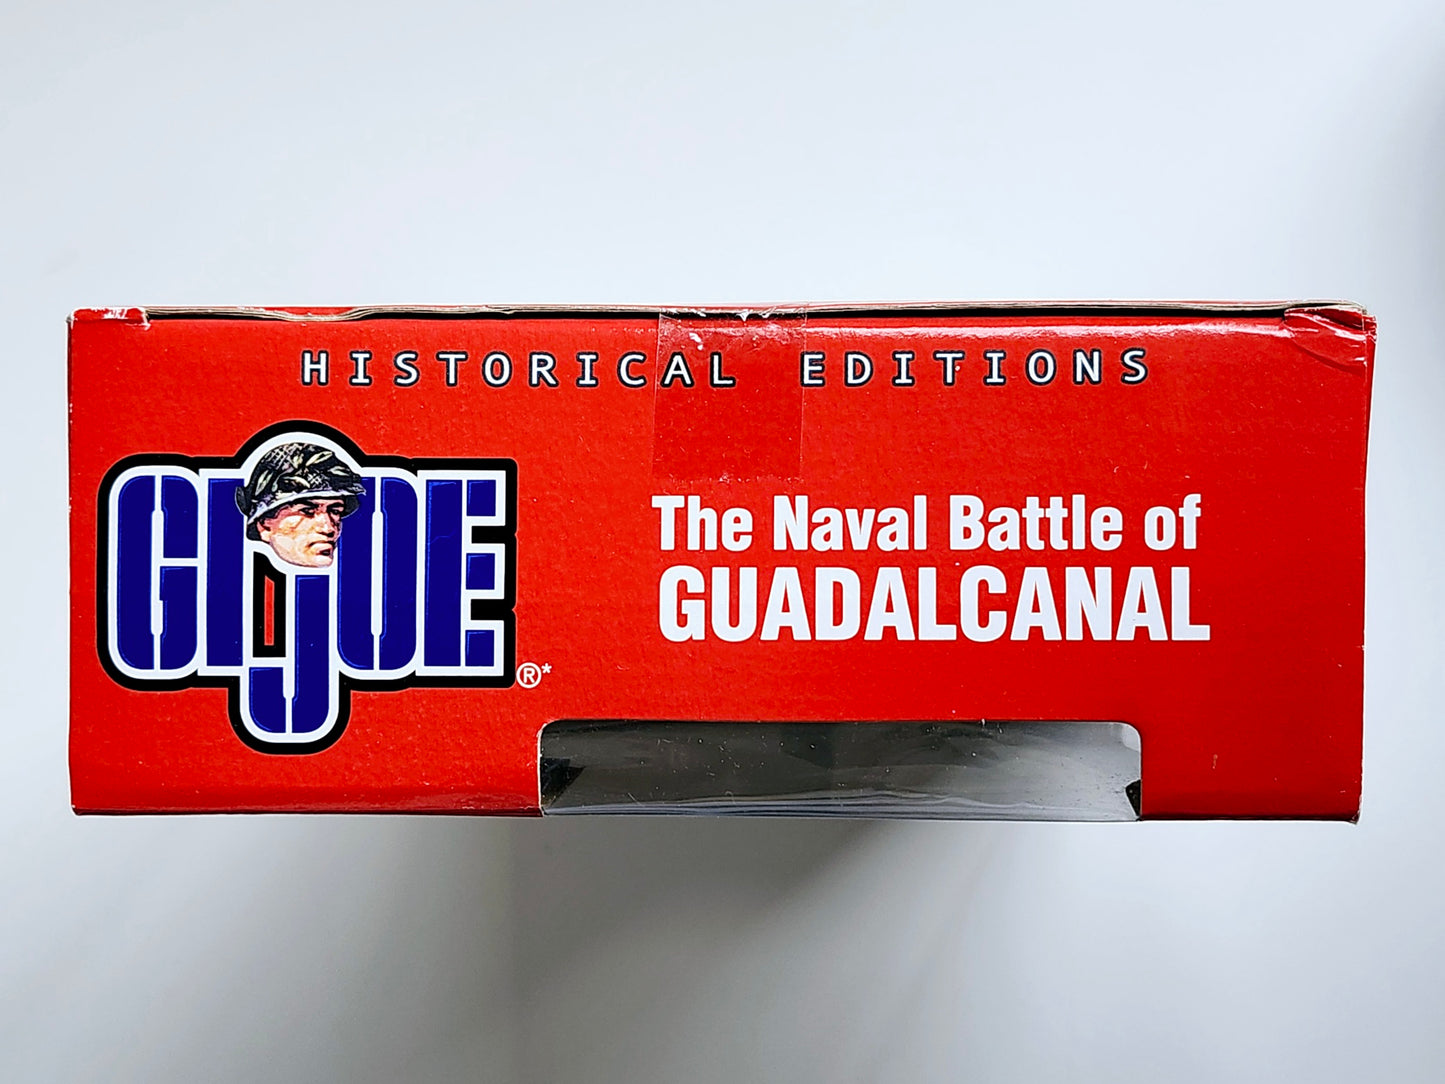 G.I. Joe Life Historical Editions The Naval Battle of Guadalcanal 12-Inch Action Figure